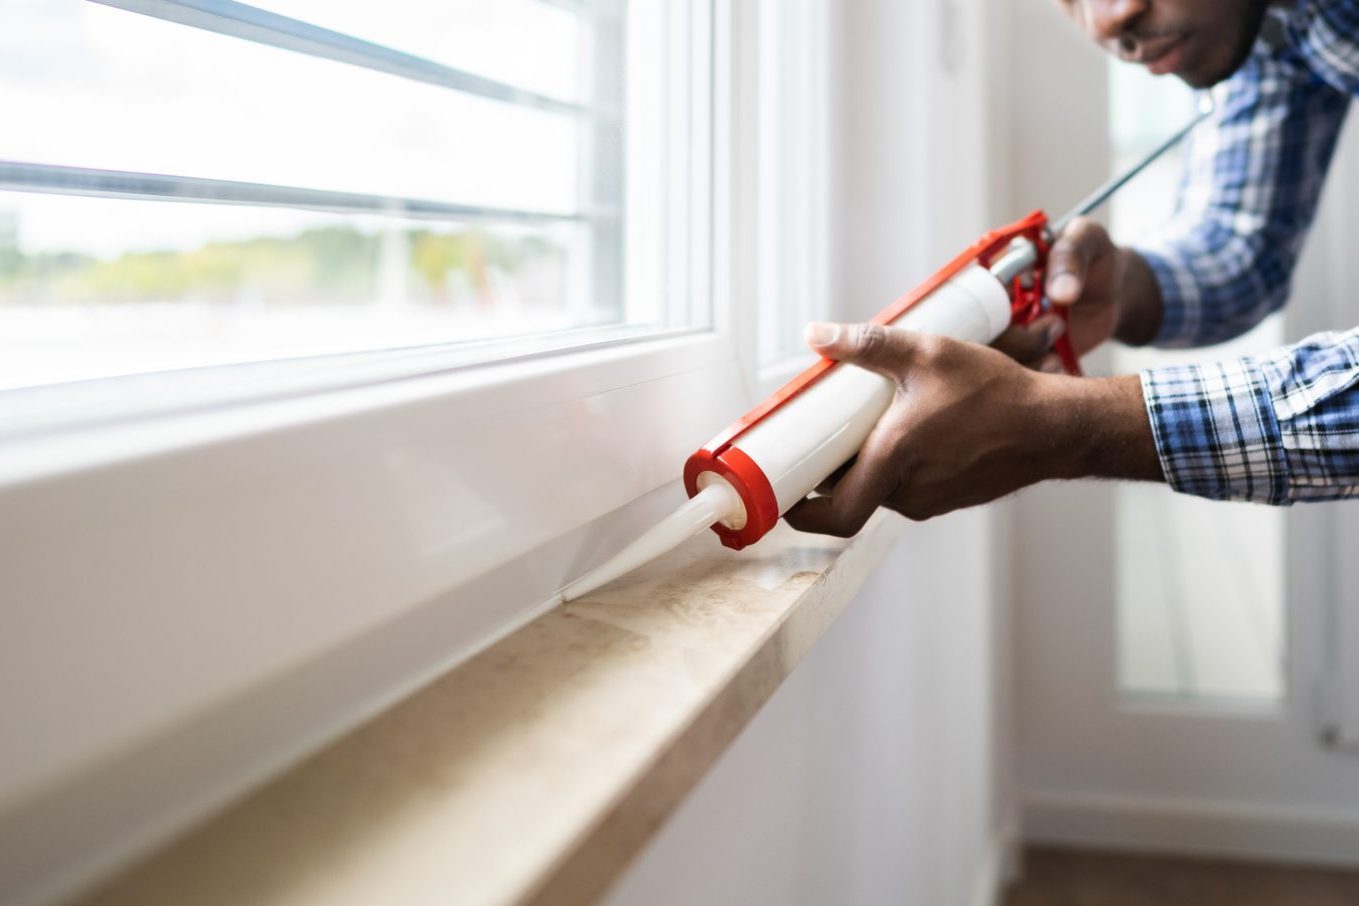 Caulk Smarter With These Handy Hints